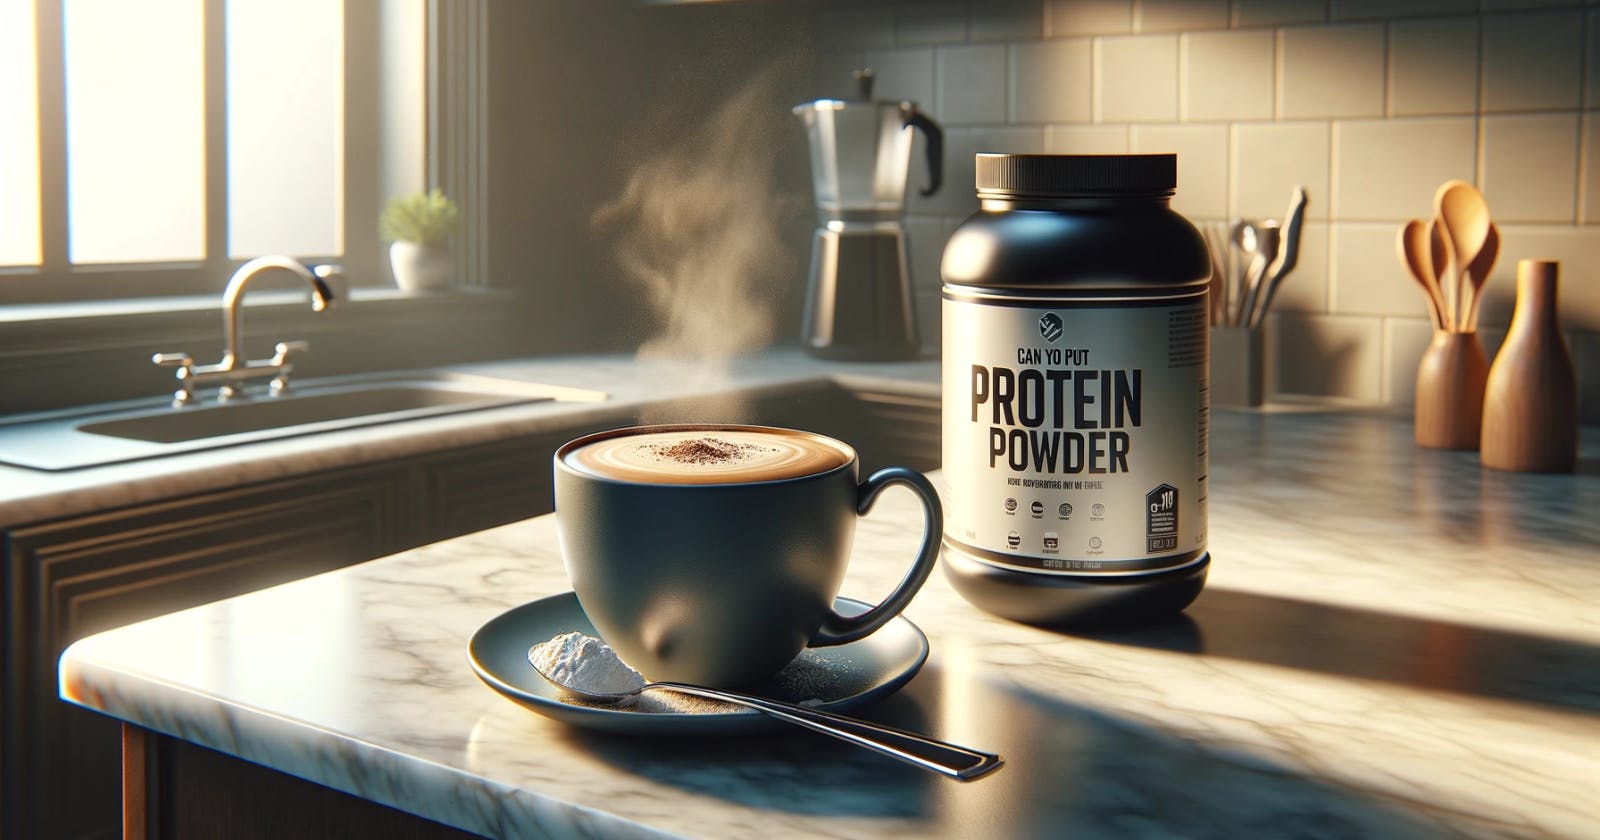 Can You Put Protein Powder in Coffee?